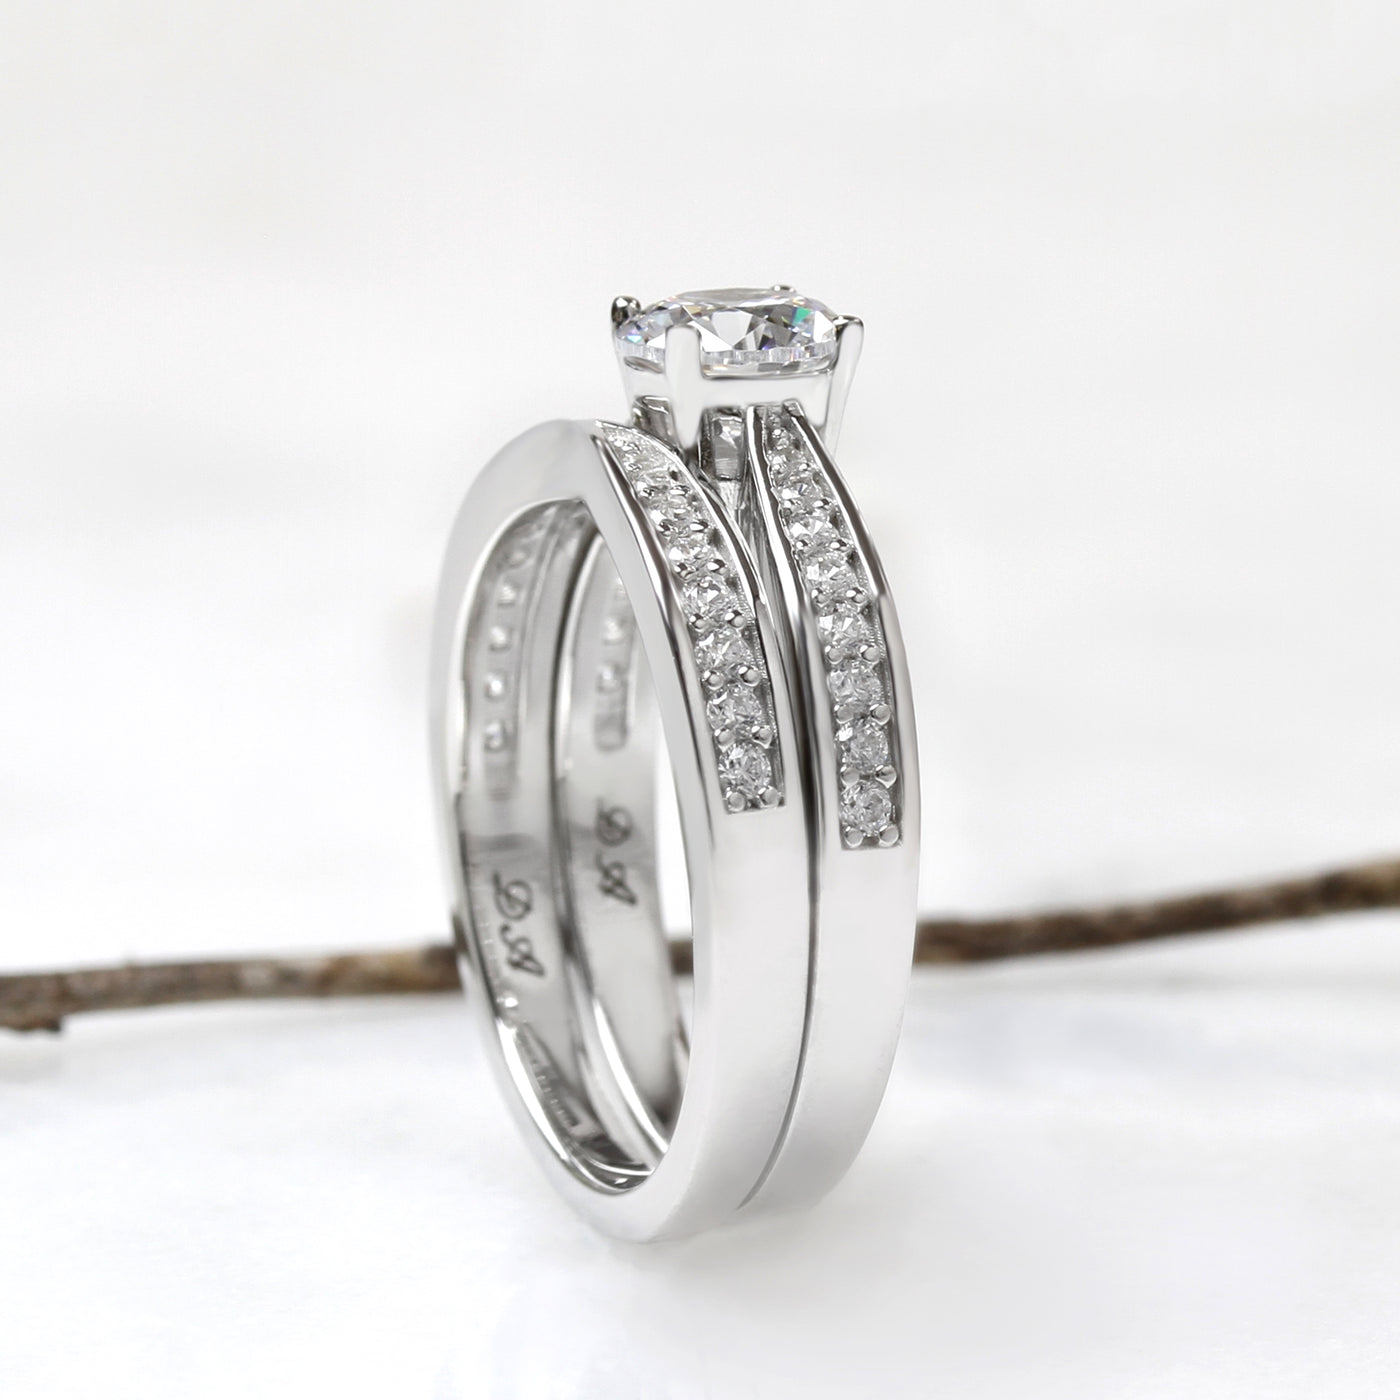 Brilliant 1 CT Pinched Shank Classic Bridal Ring Set, Platinum Plated Sterling Silver